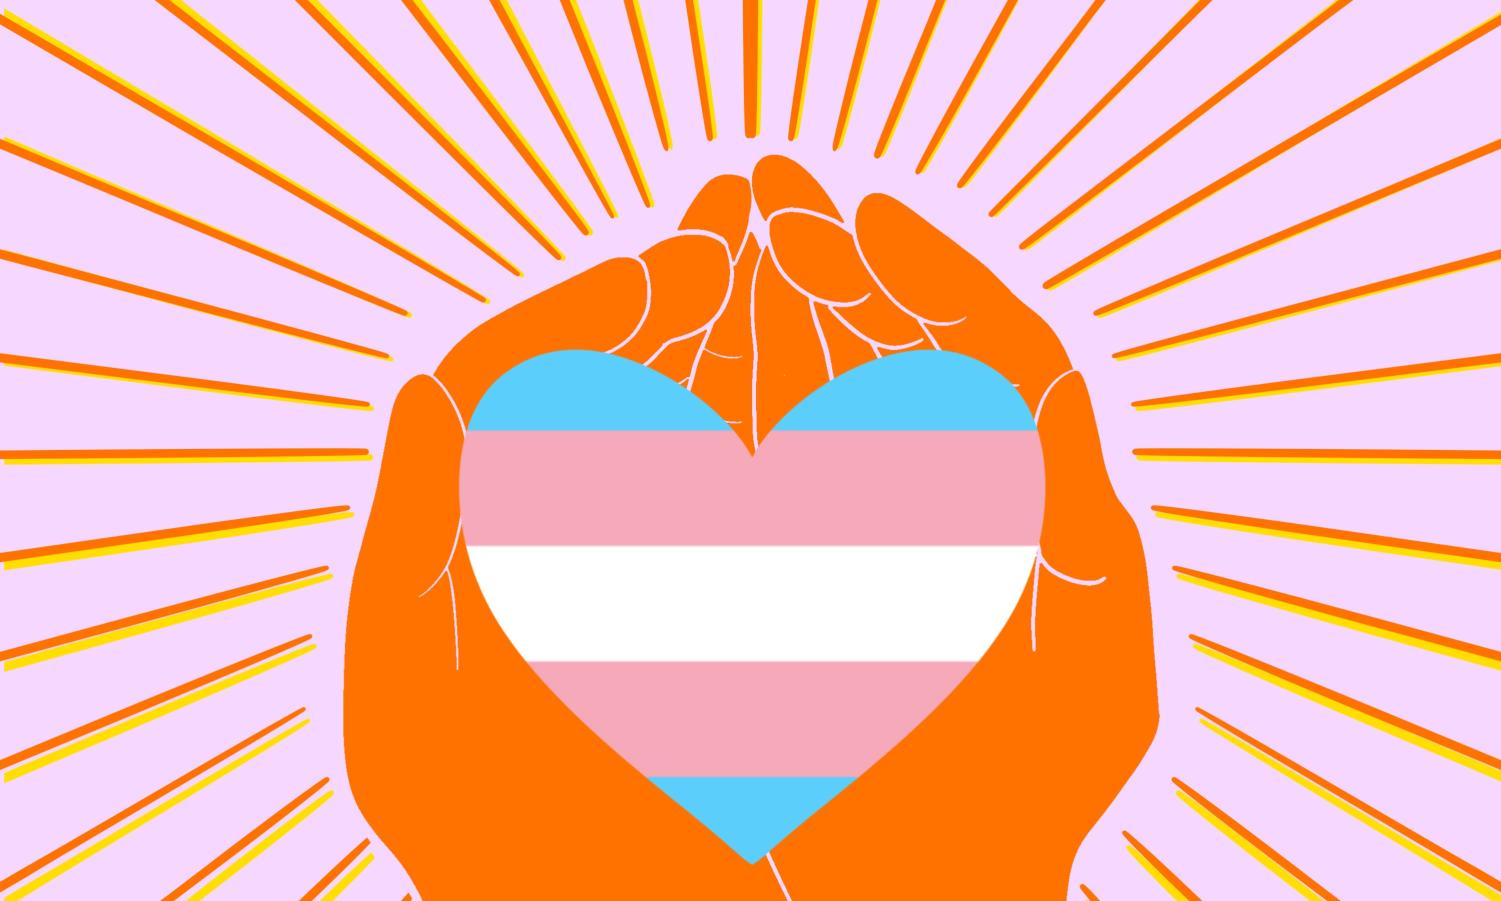 Orange+hands+clasping+a+heart-shaped+trans+flag.+Pink+background+with+orange+stripes.